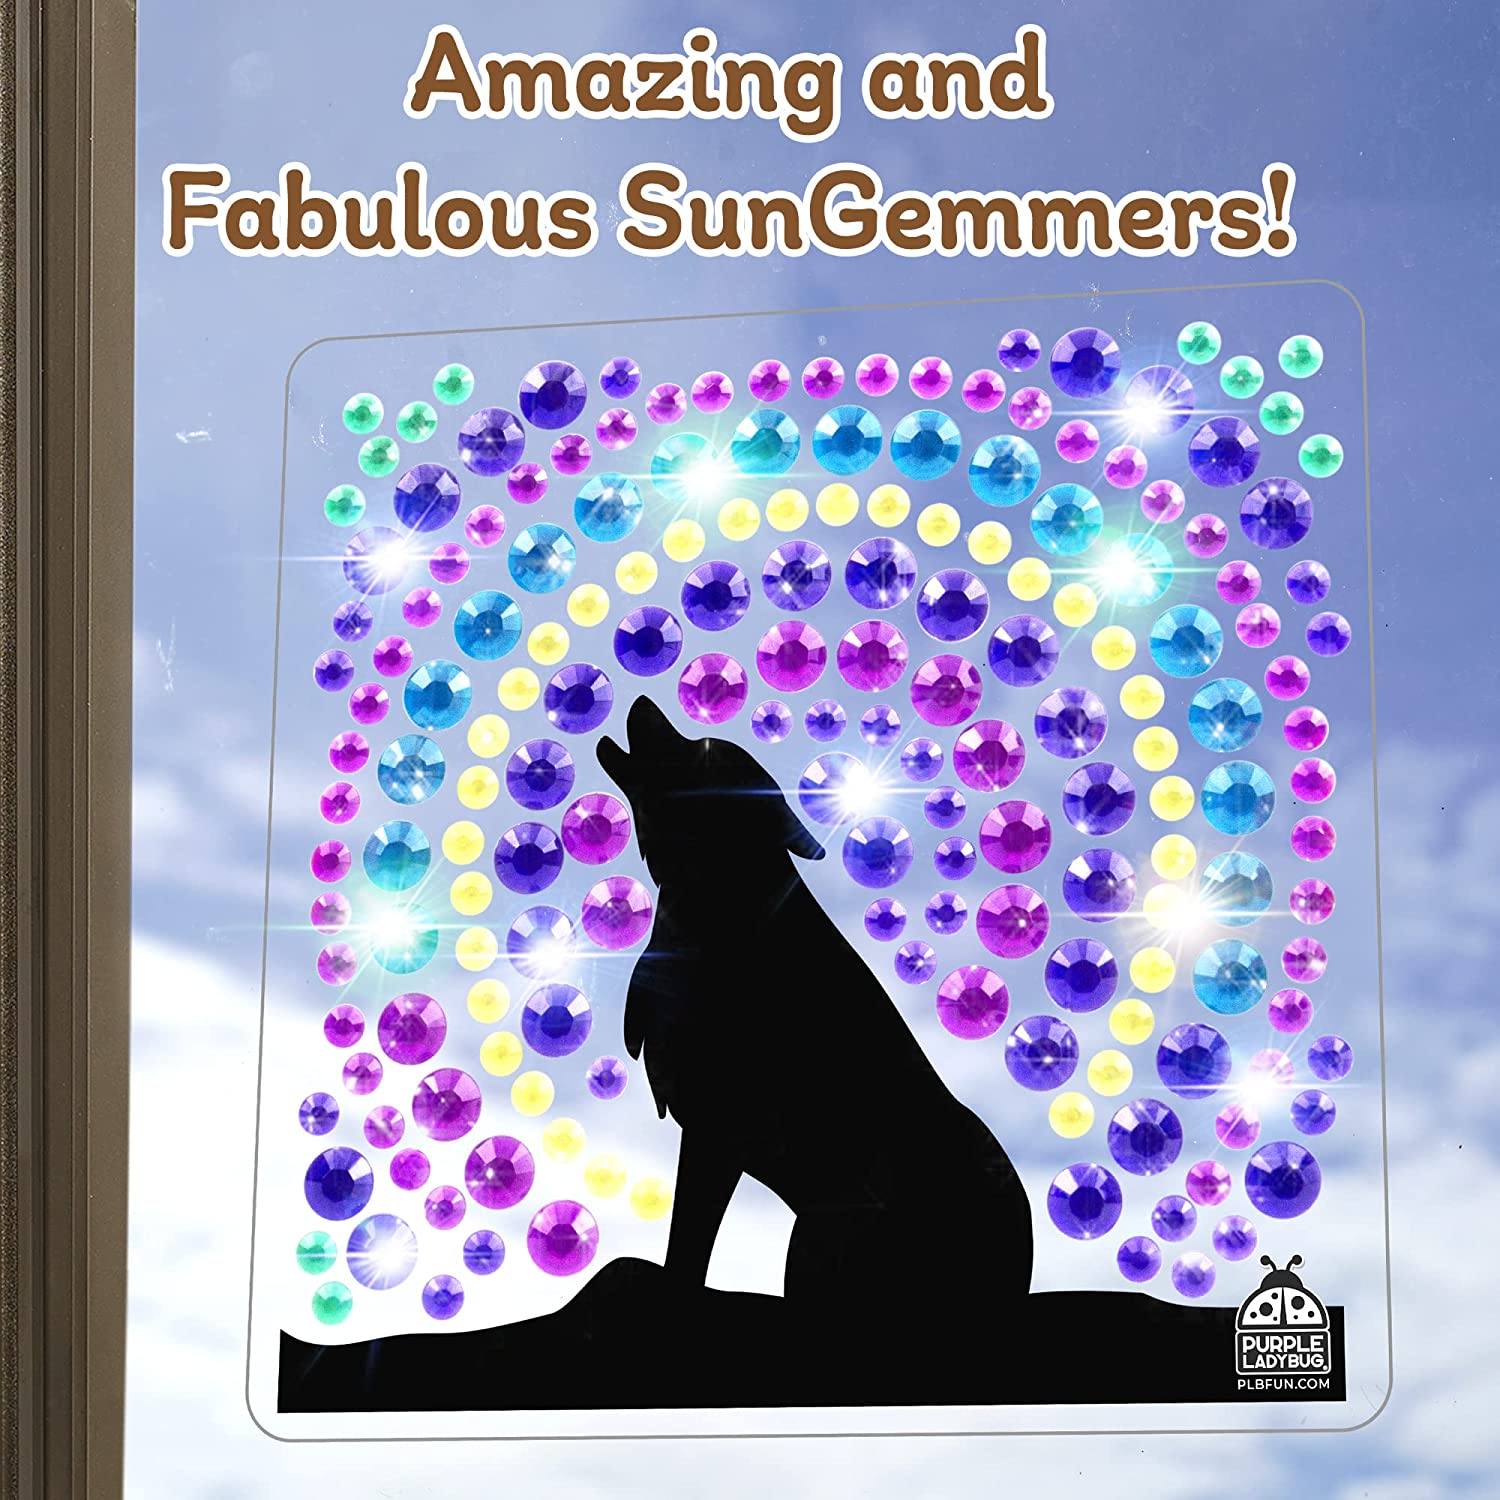 PURPLE LADYBUG SUNGEMMERS Gem Art Suncatcher Kit for Kids + 7 Brown Gift  Bags with Scratch Panel for Messages